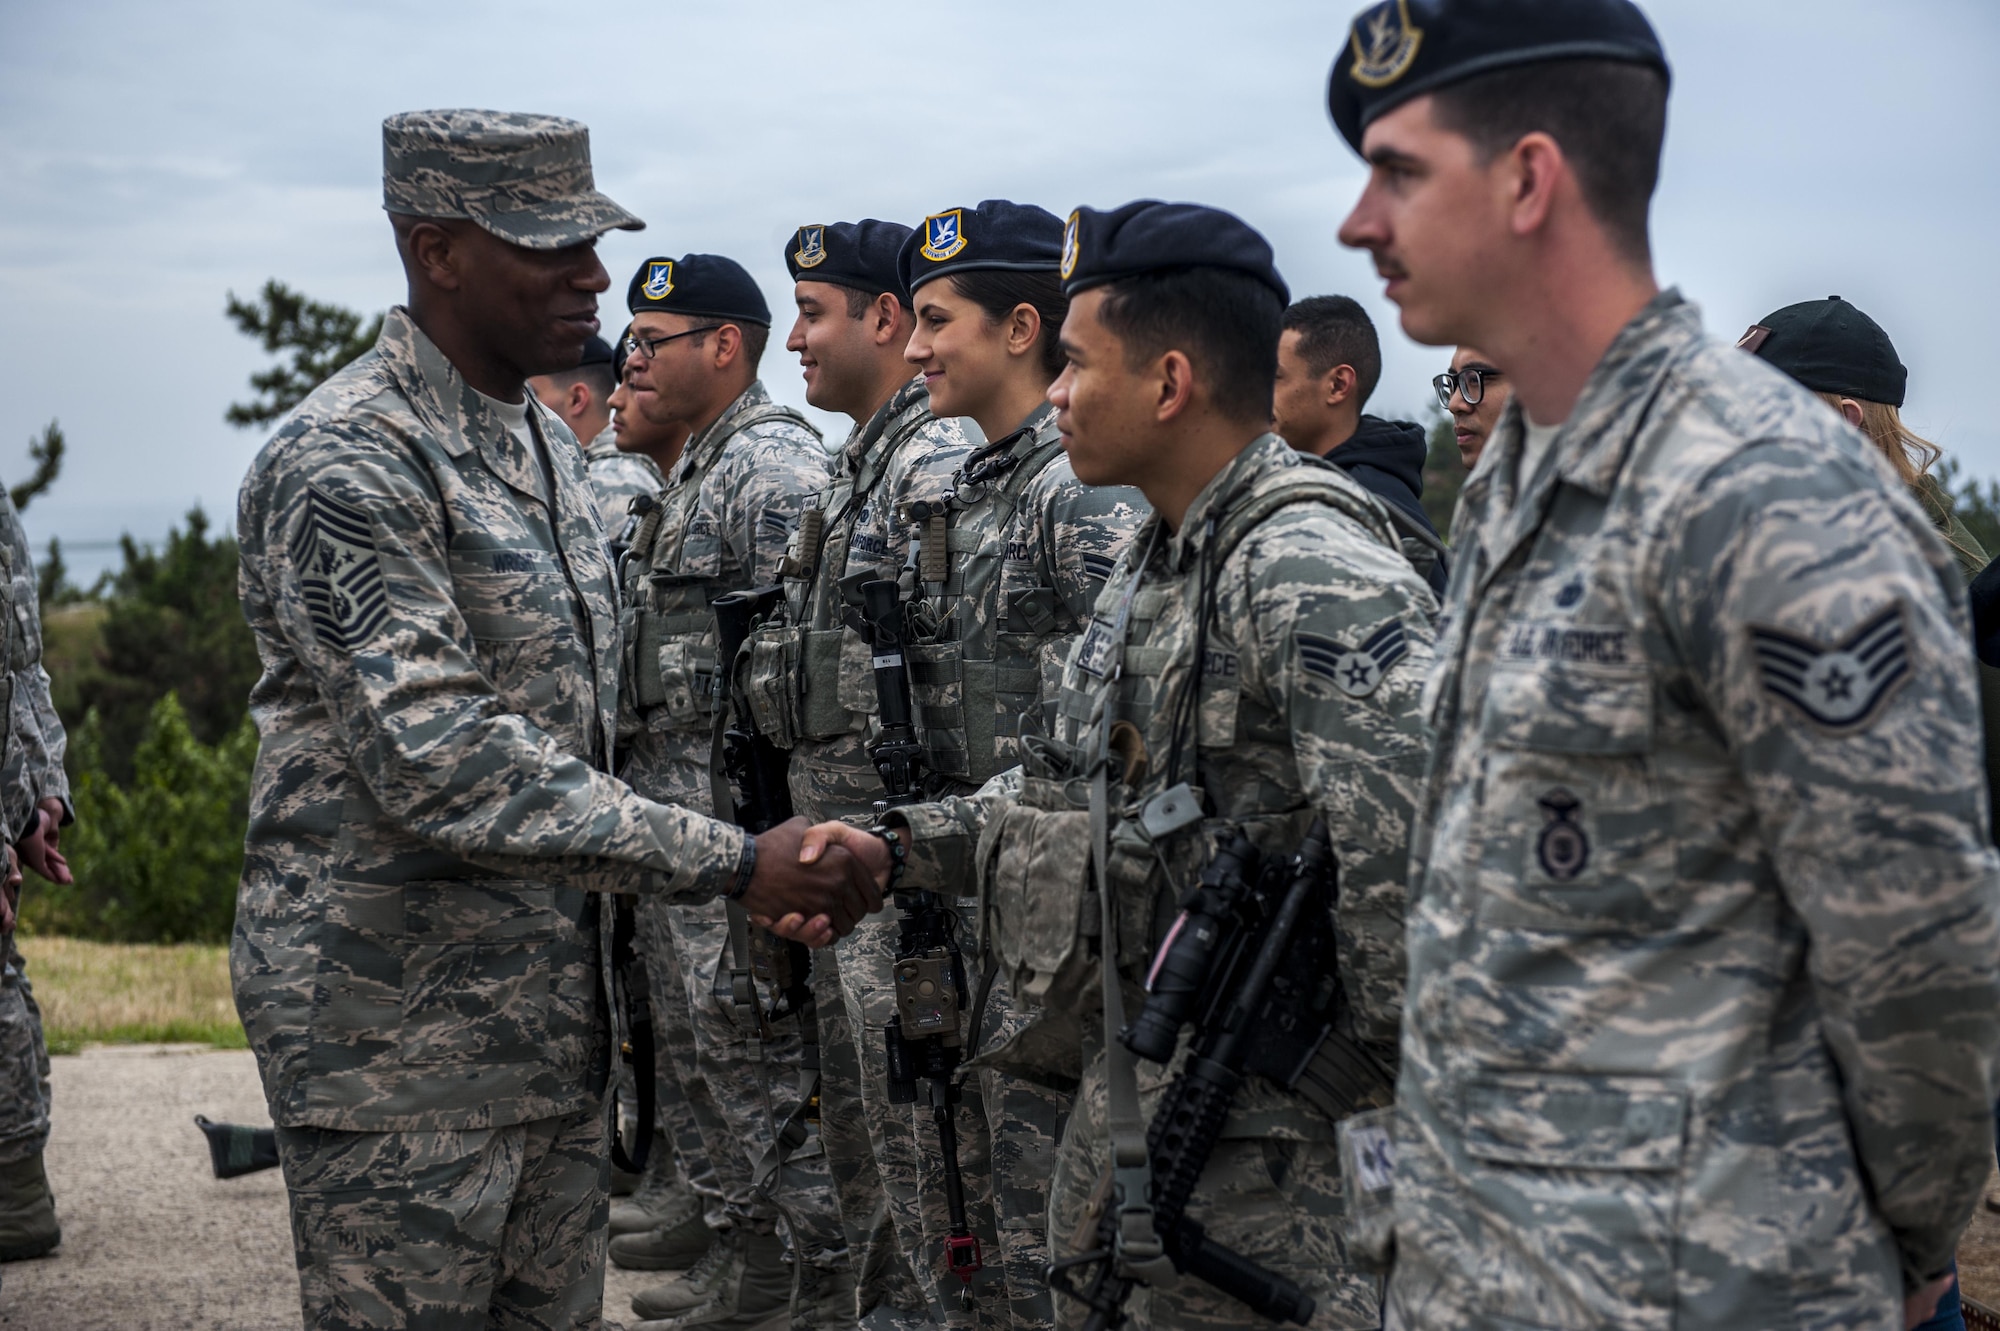 Chief Master Sgt. of the Air Force Kaleth O. Wright shakes hands with an Airman assigned to the 8th Security Forces Squadron as he takes a tour of the squadrons at Kunsan Air Base, Republic of Korea, June 6, 2017. 8th SFS showcased their role in the first priority of Wolf Pack’s mission to, “Defend the Base.” (U.S. Air Force photo by Senior Airman Colville McFee/Released)